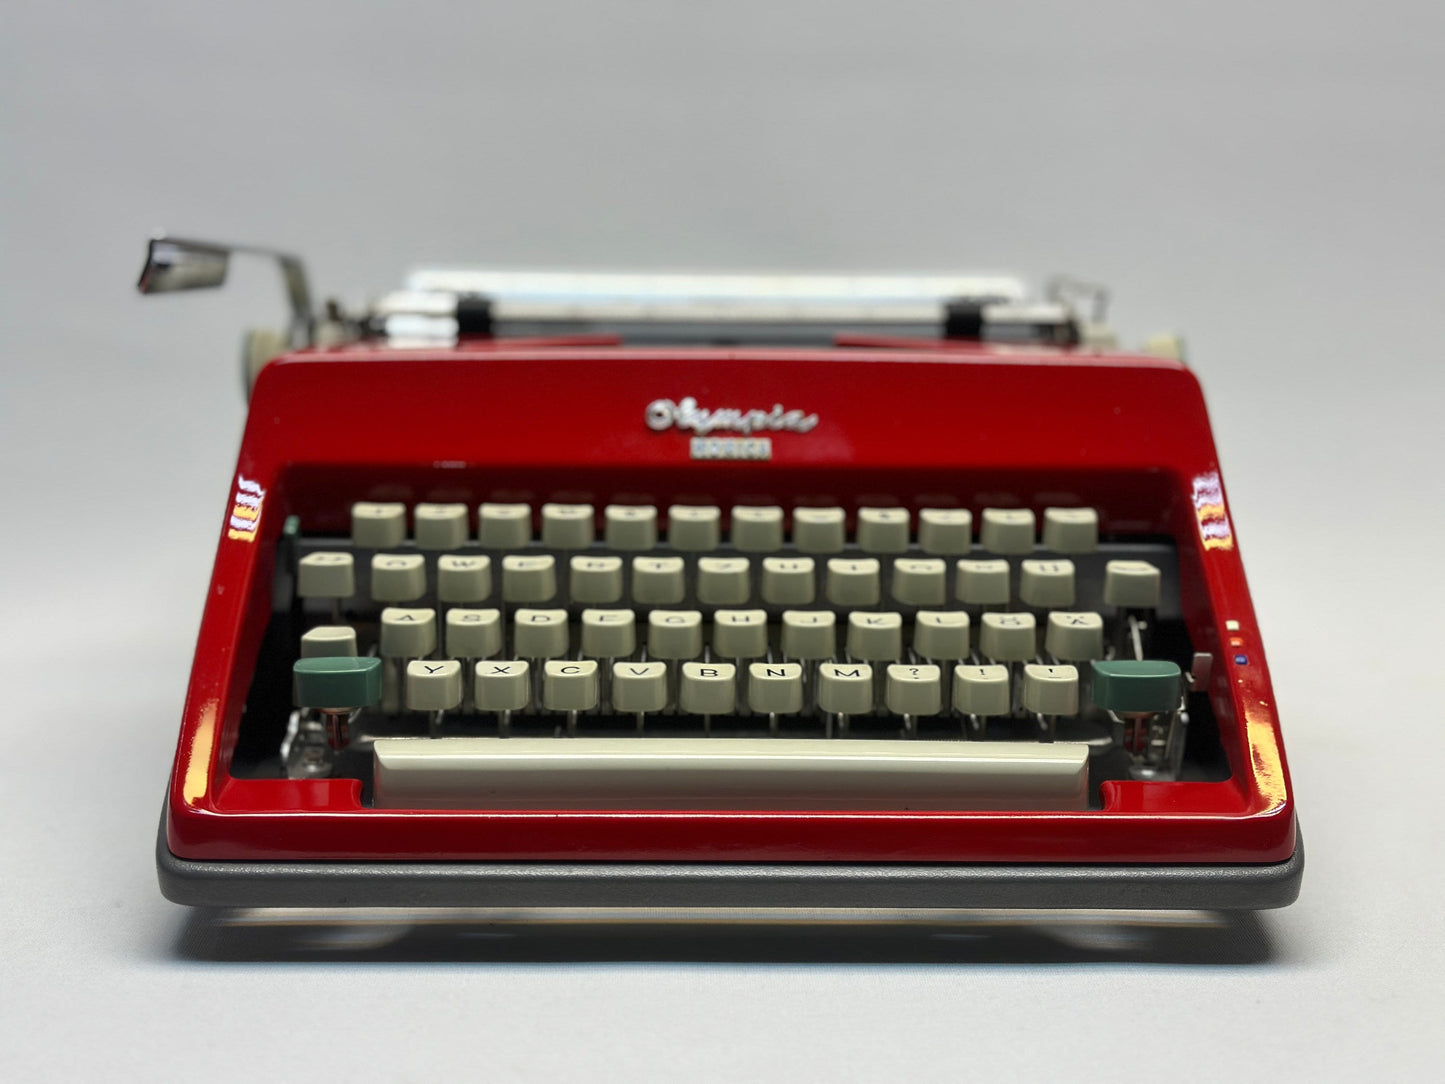 Experience Vintage Elegance with the Olympia Monica Red Typewriter - QWERTZ White Keyboard, Antique 1960 Model